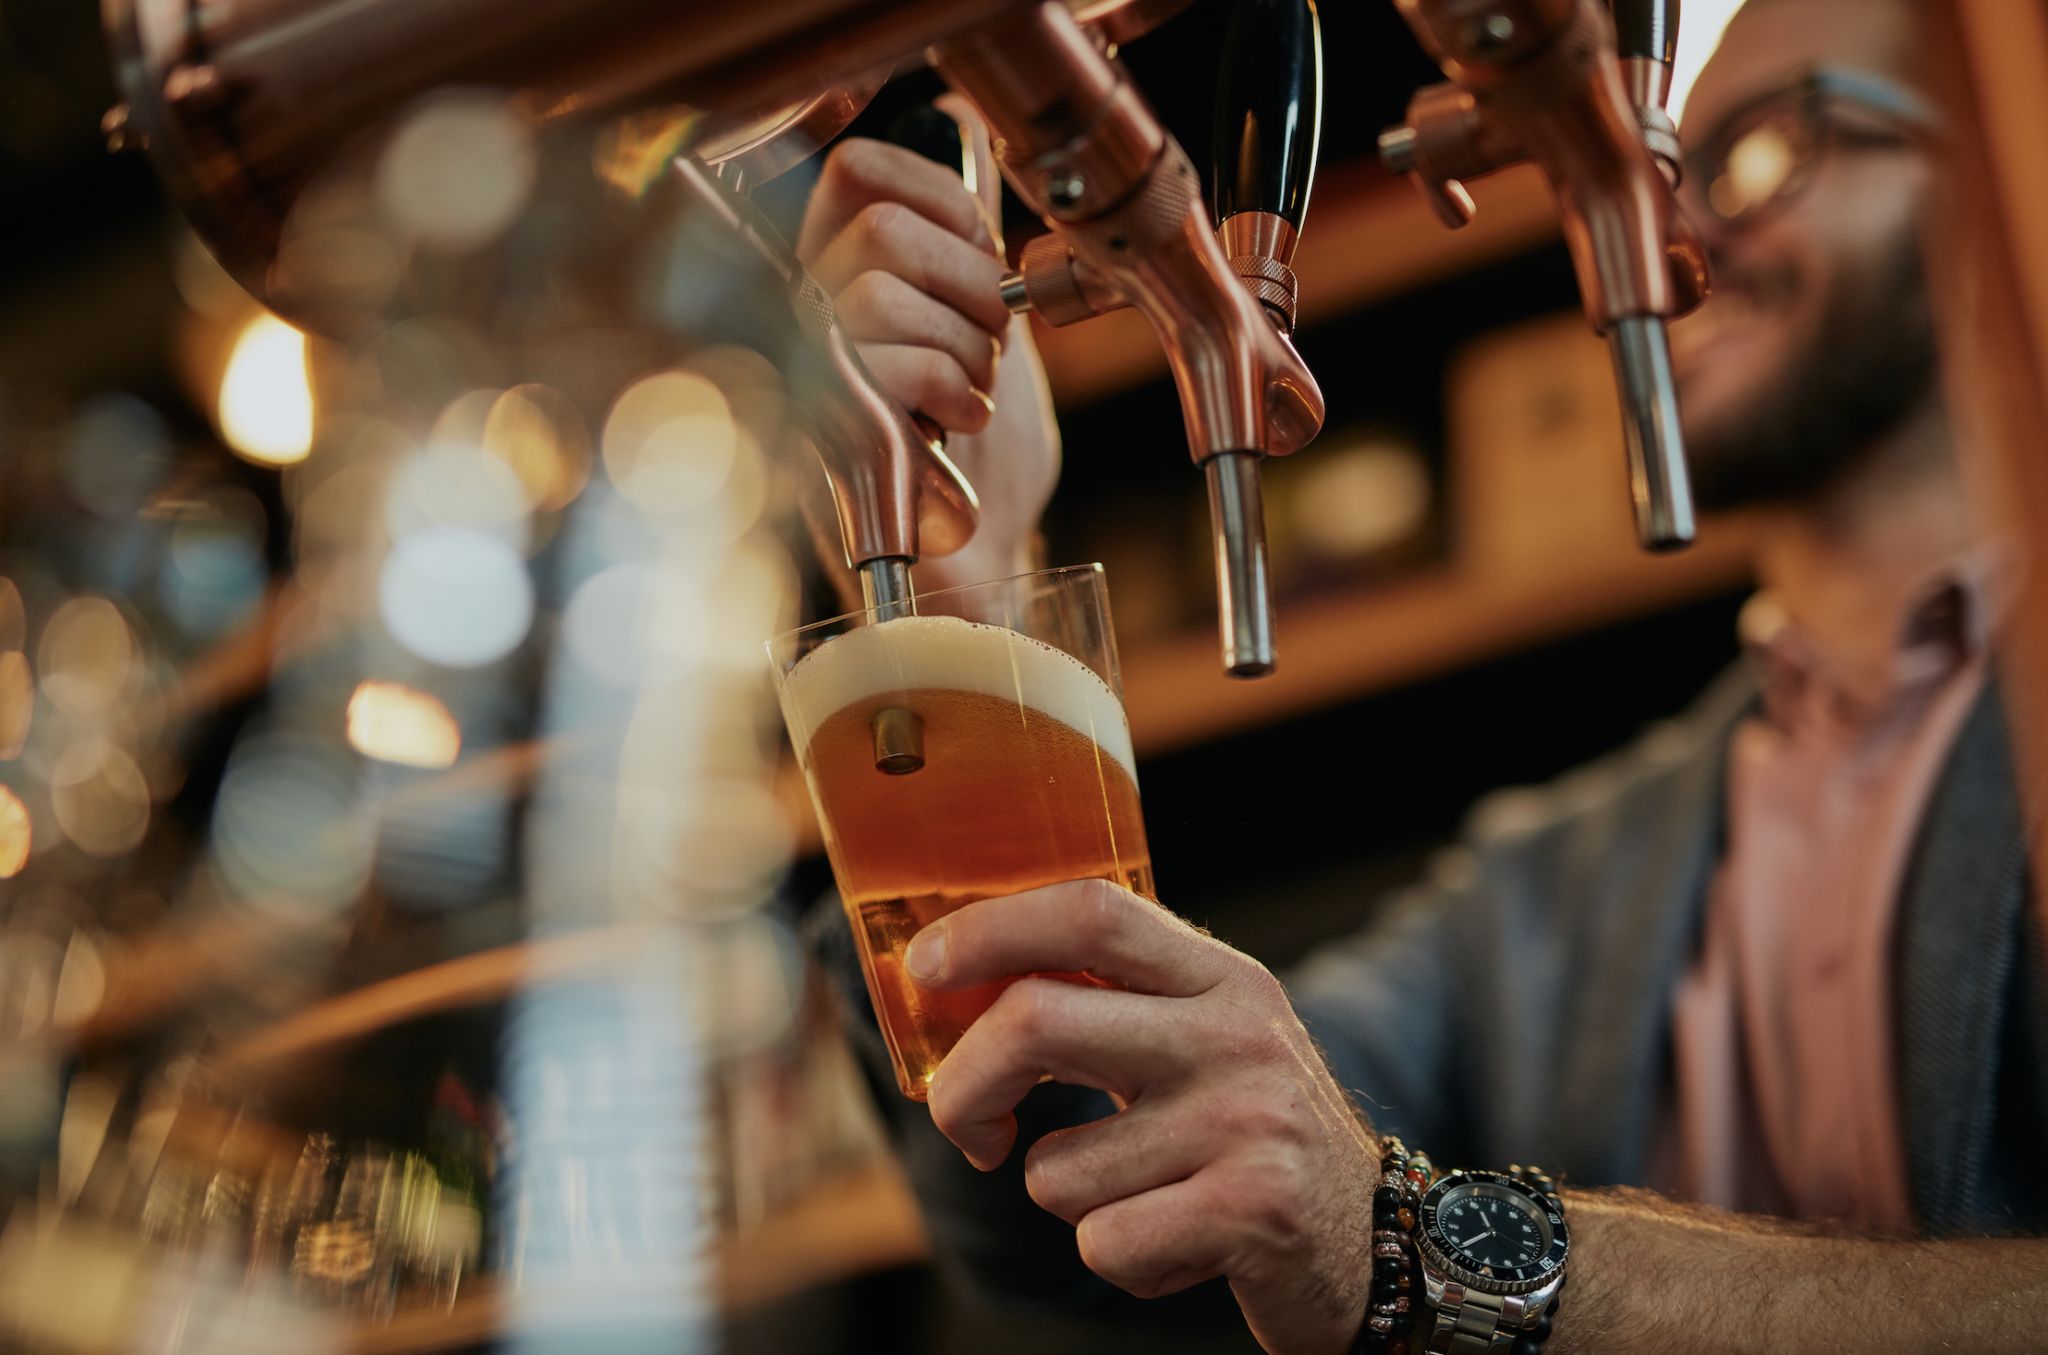 VFI "demand" government open wet pubs this Friday, claim misleading data used to keep them closed